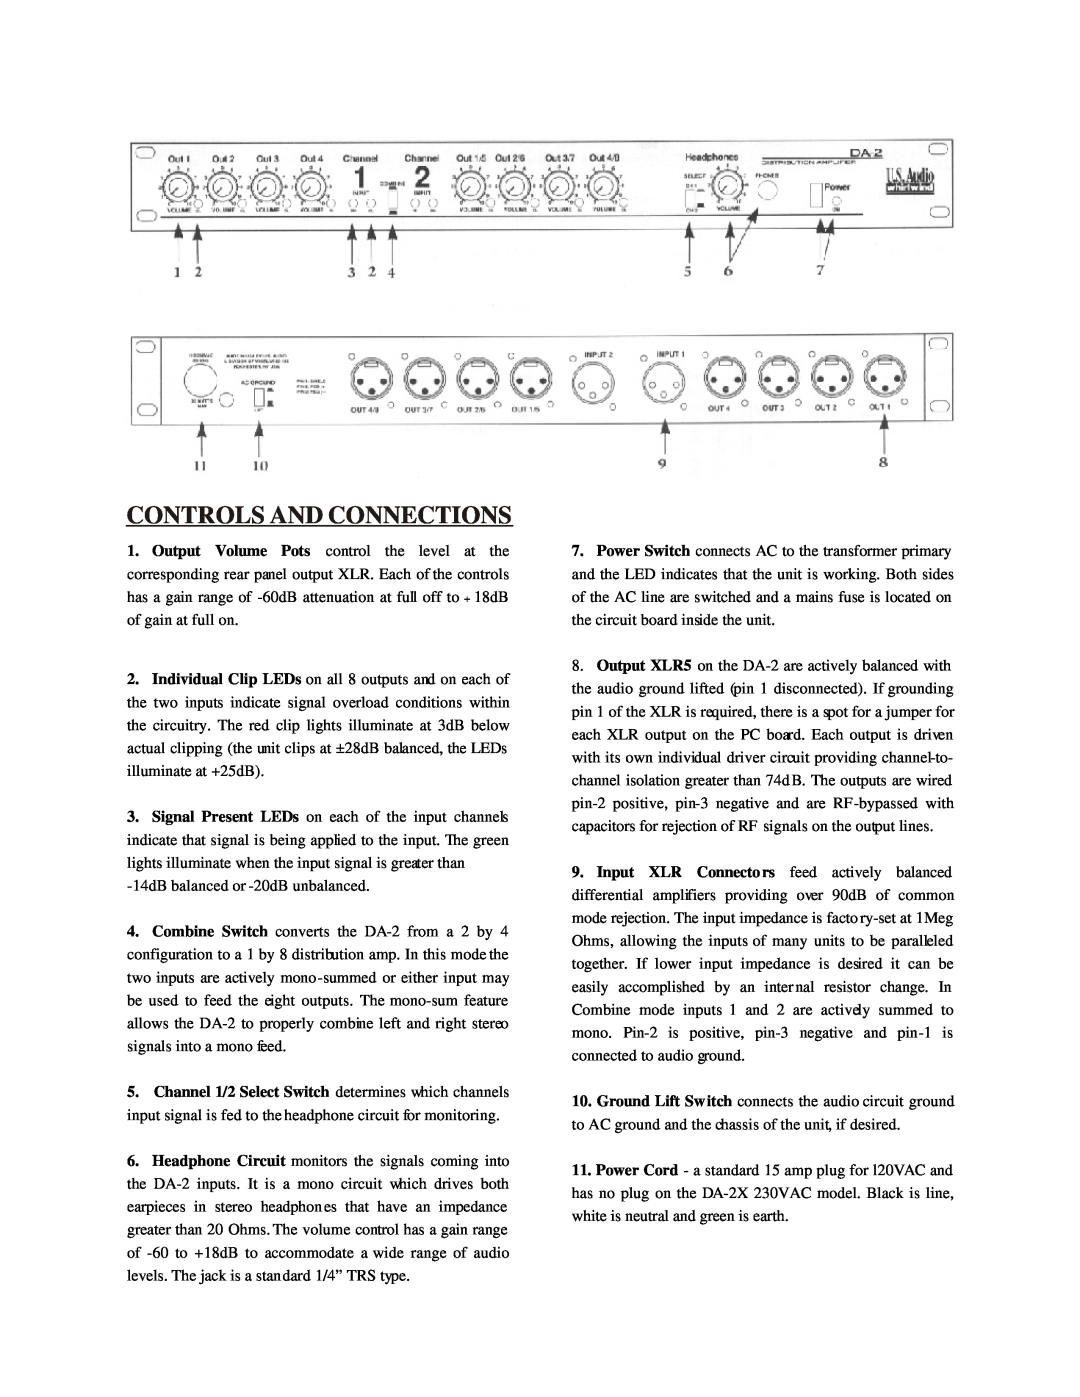 Whirlwind DA-2 manual Controls And Connections 